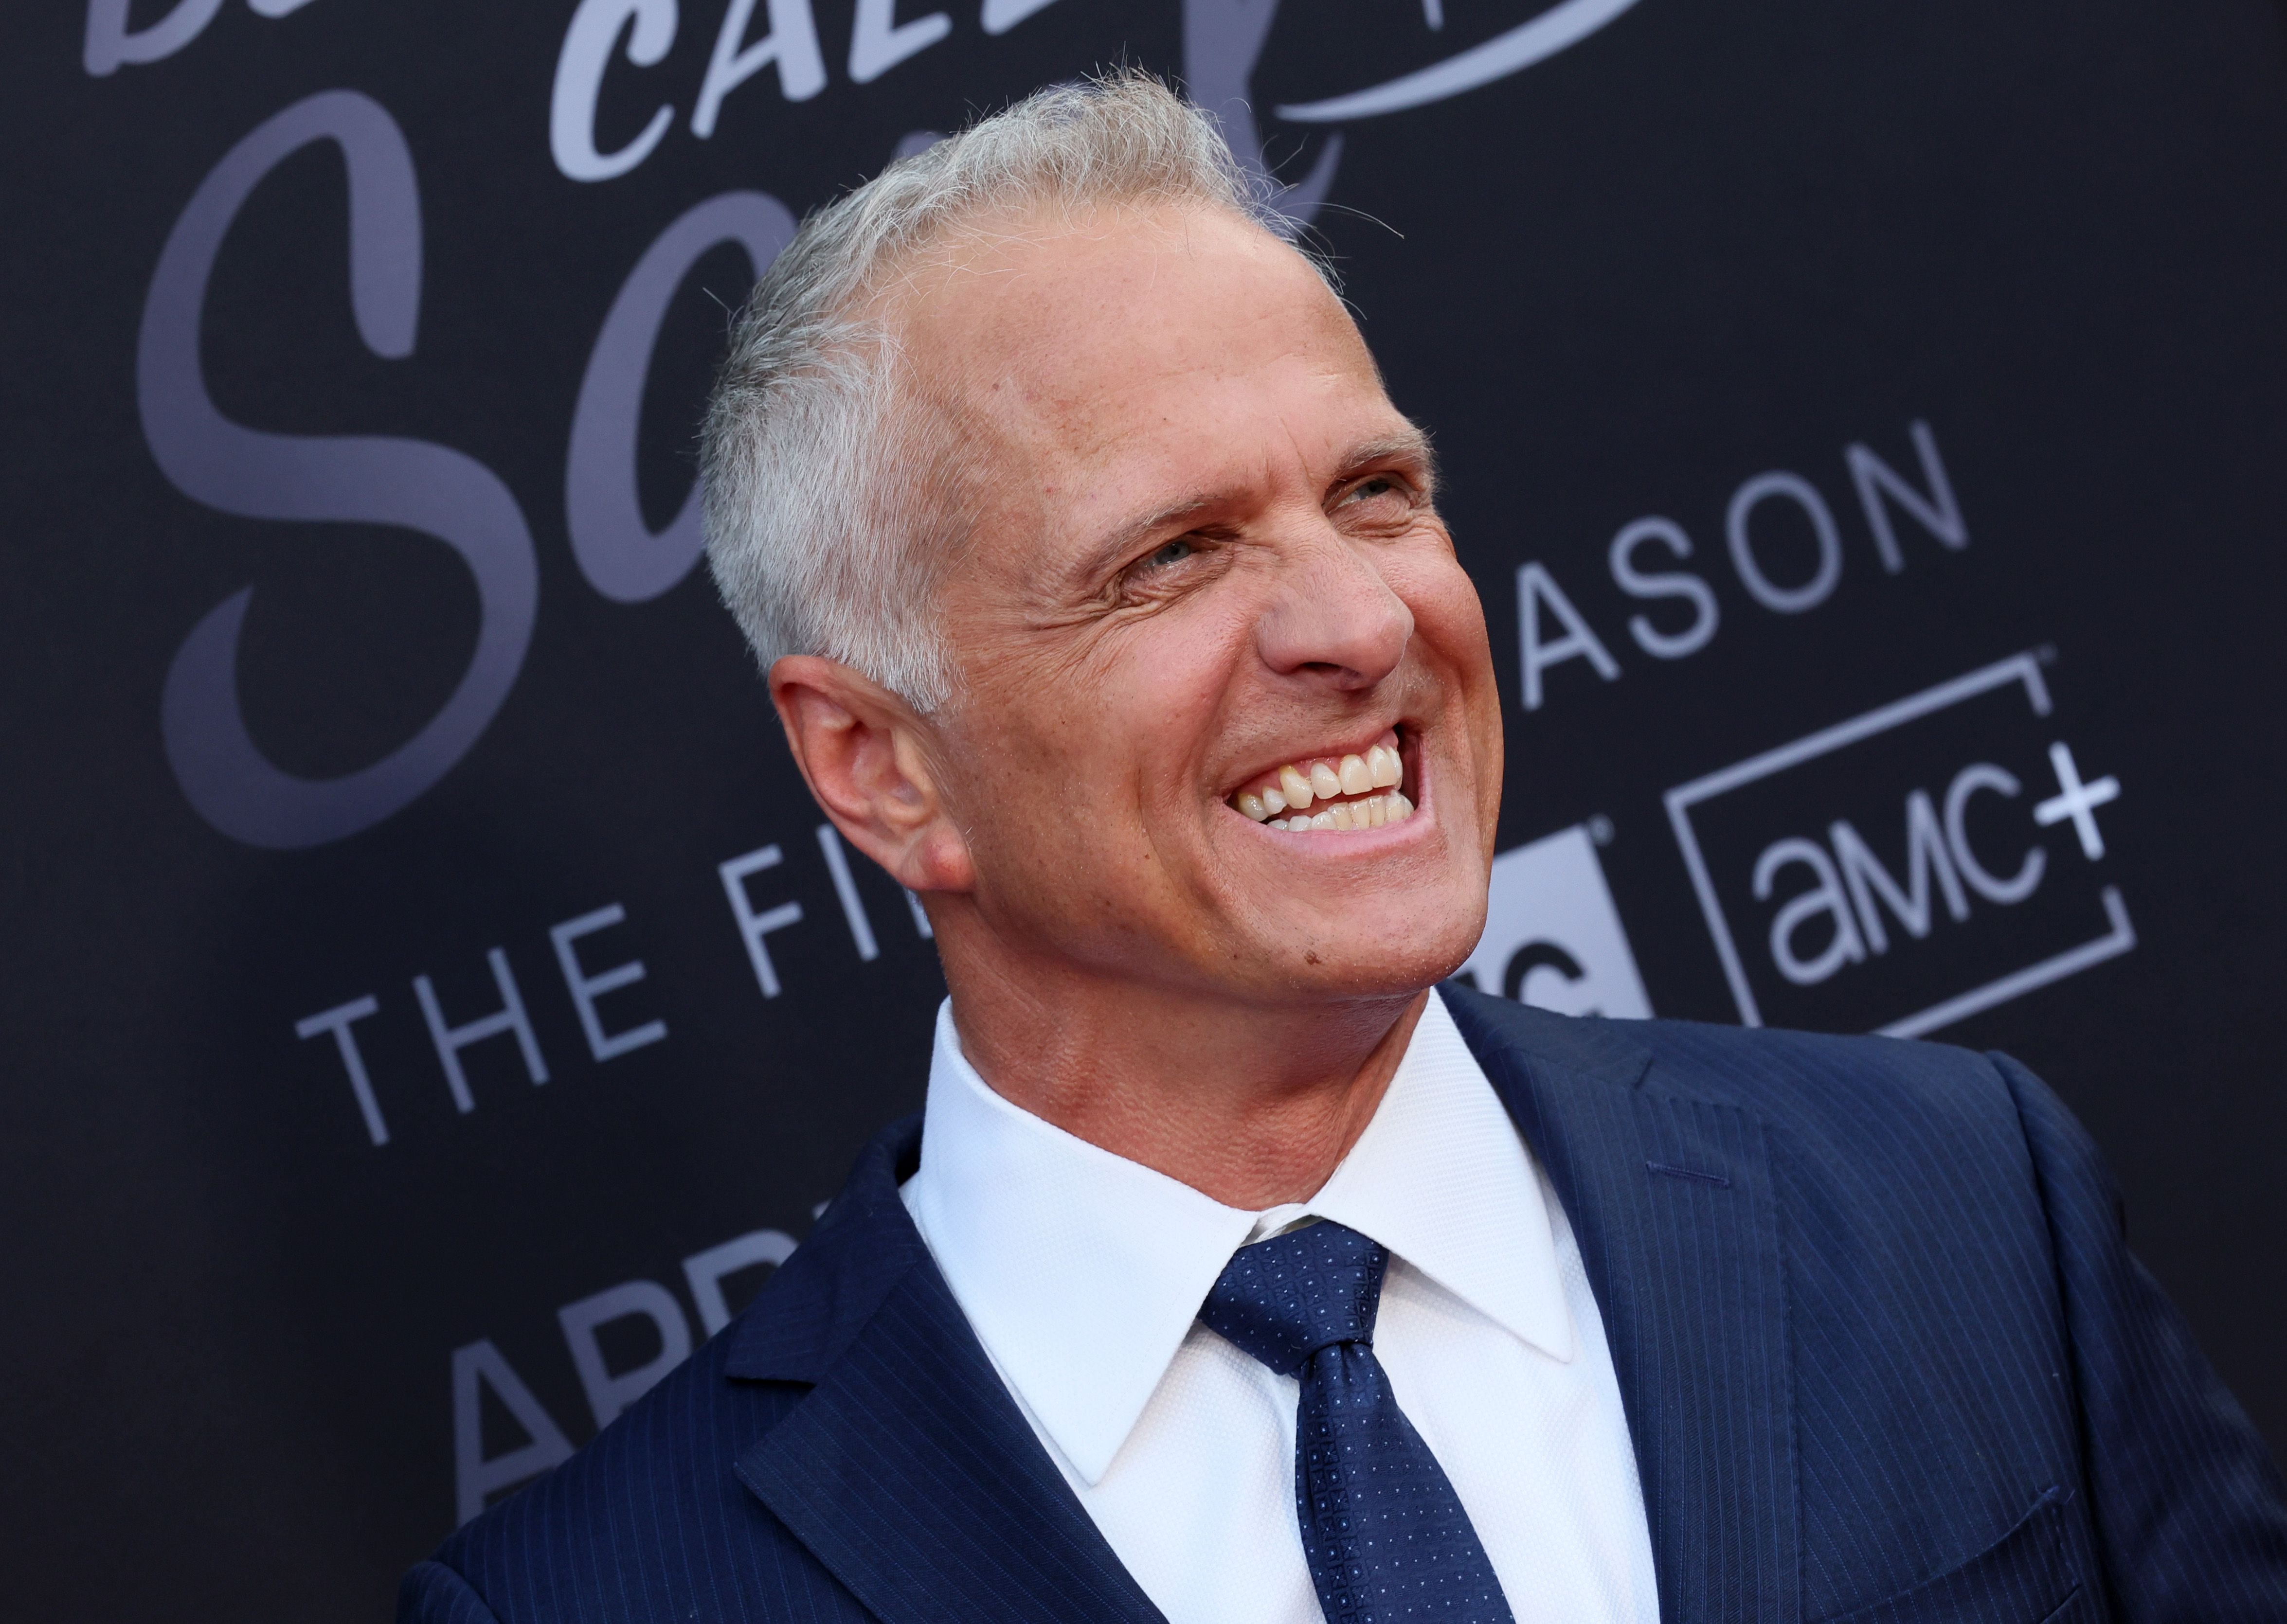 Patrick Fabian during the premiere of the sixth season of AMC's "Better Call Saul" at Hollywood Legion Theater on April 07, 2022 in Los Angeles, California. | Source: Getty Images